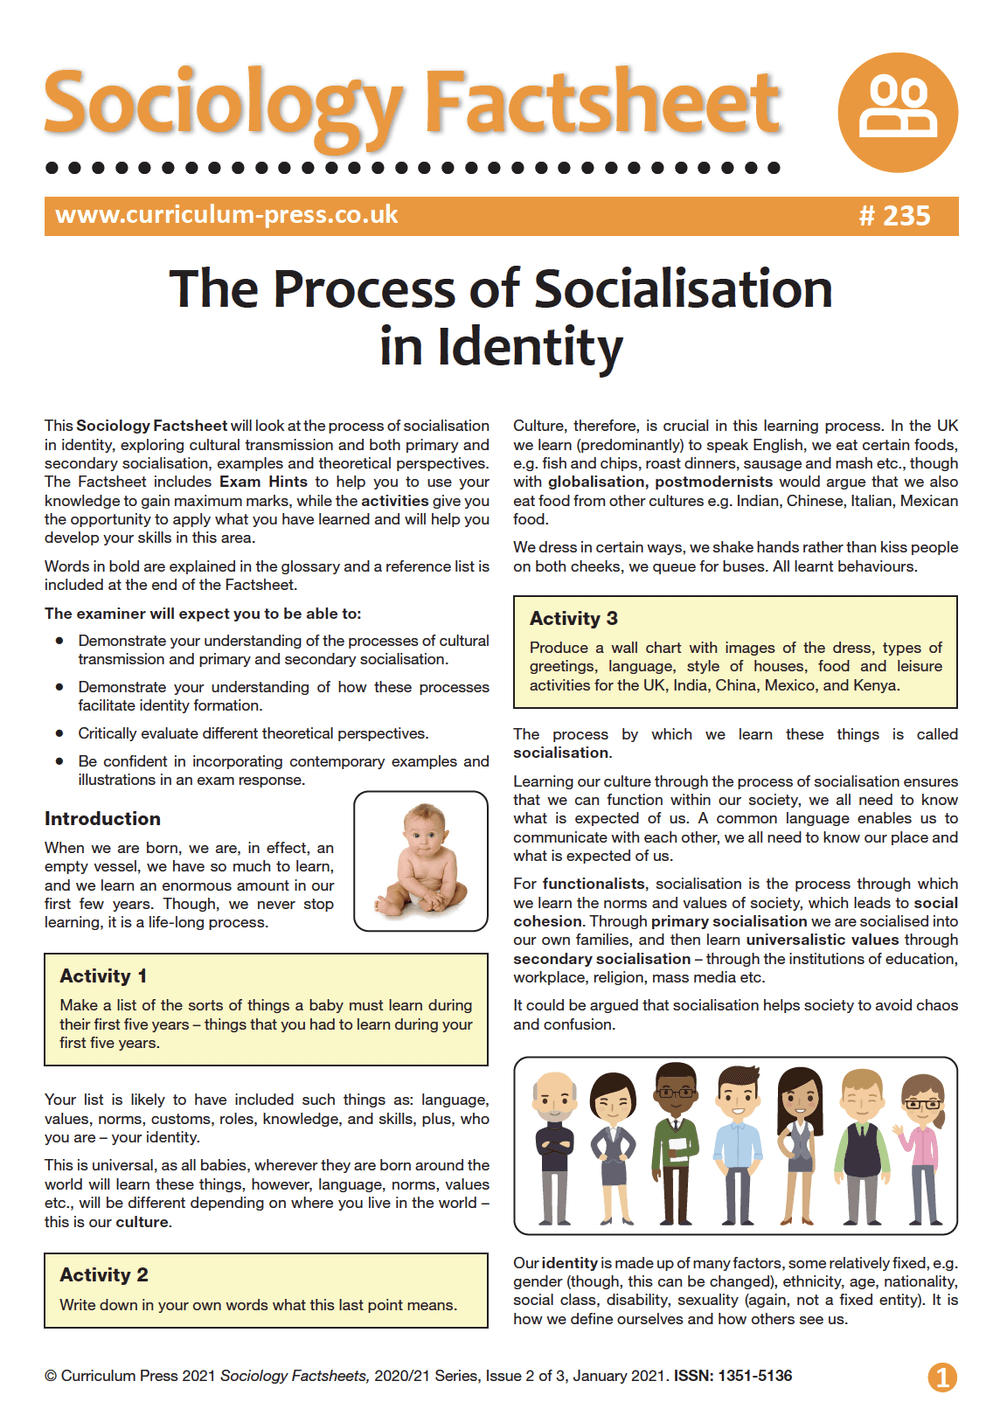 socialisation and identity of learners